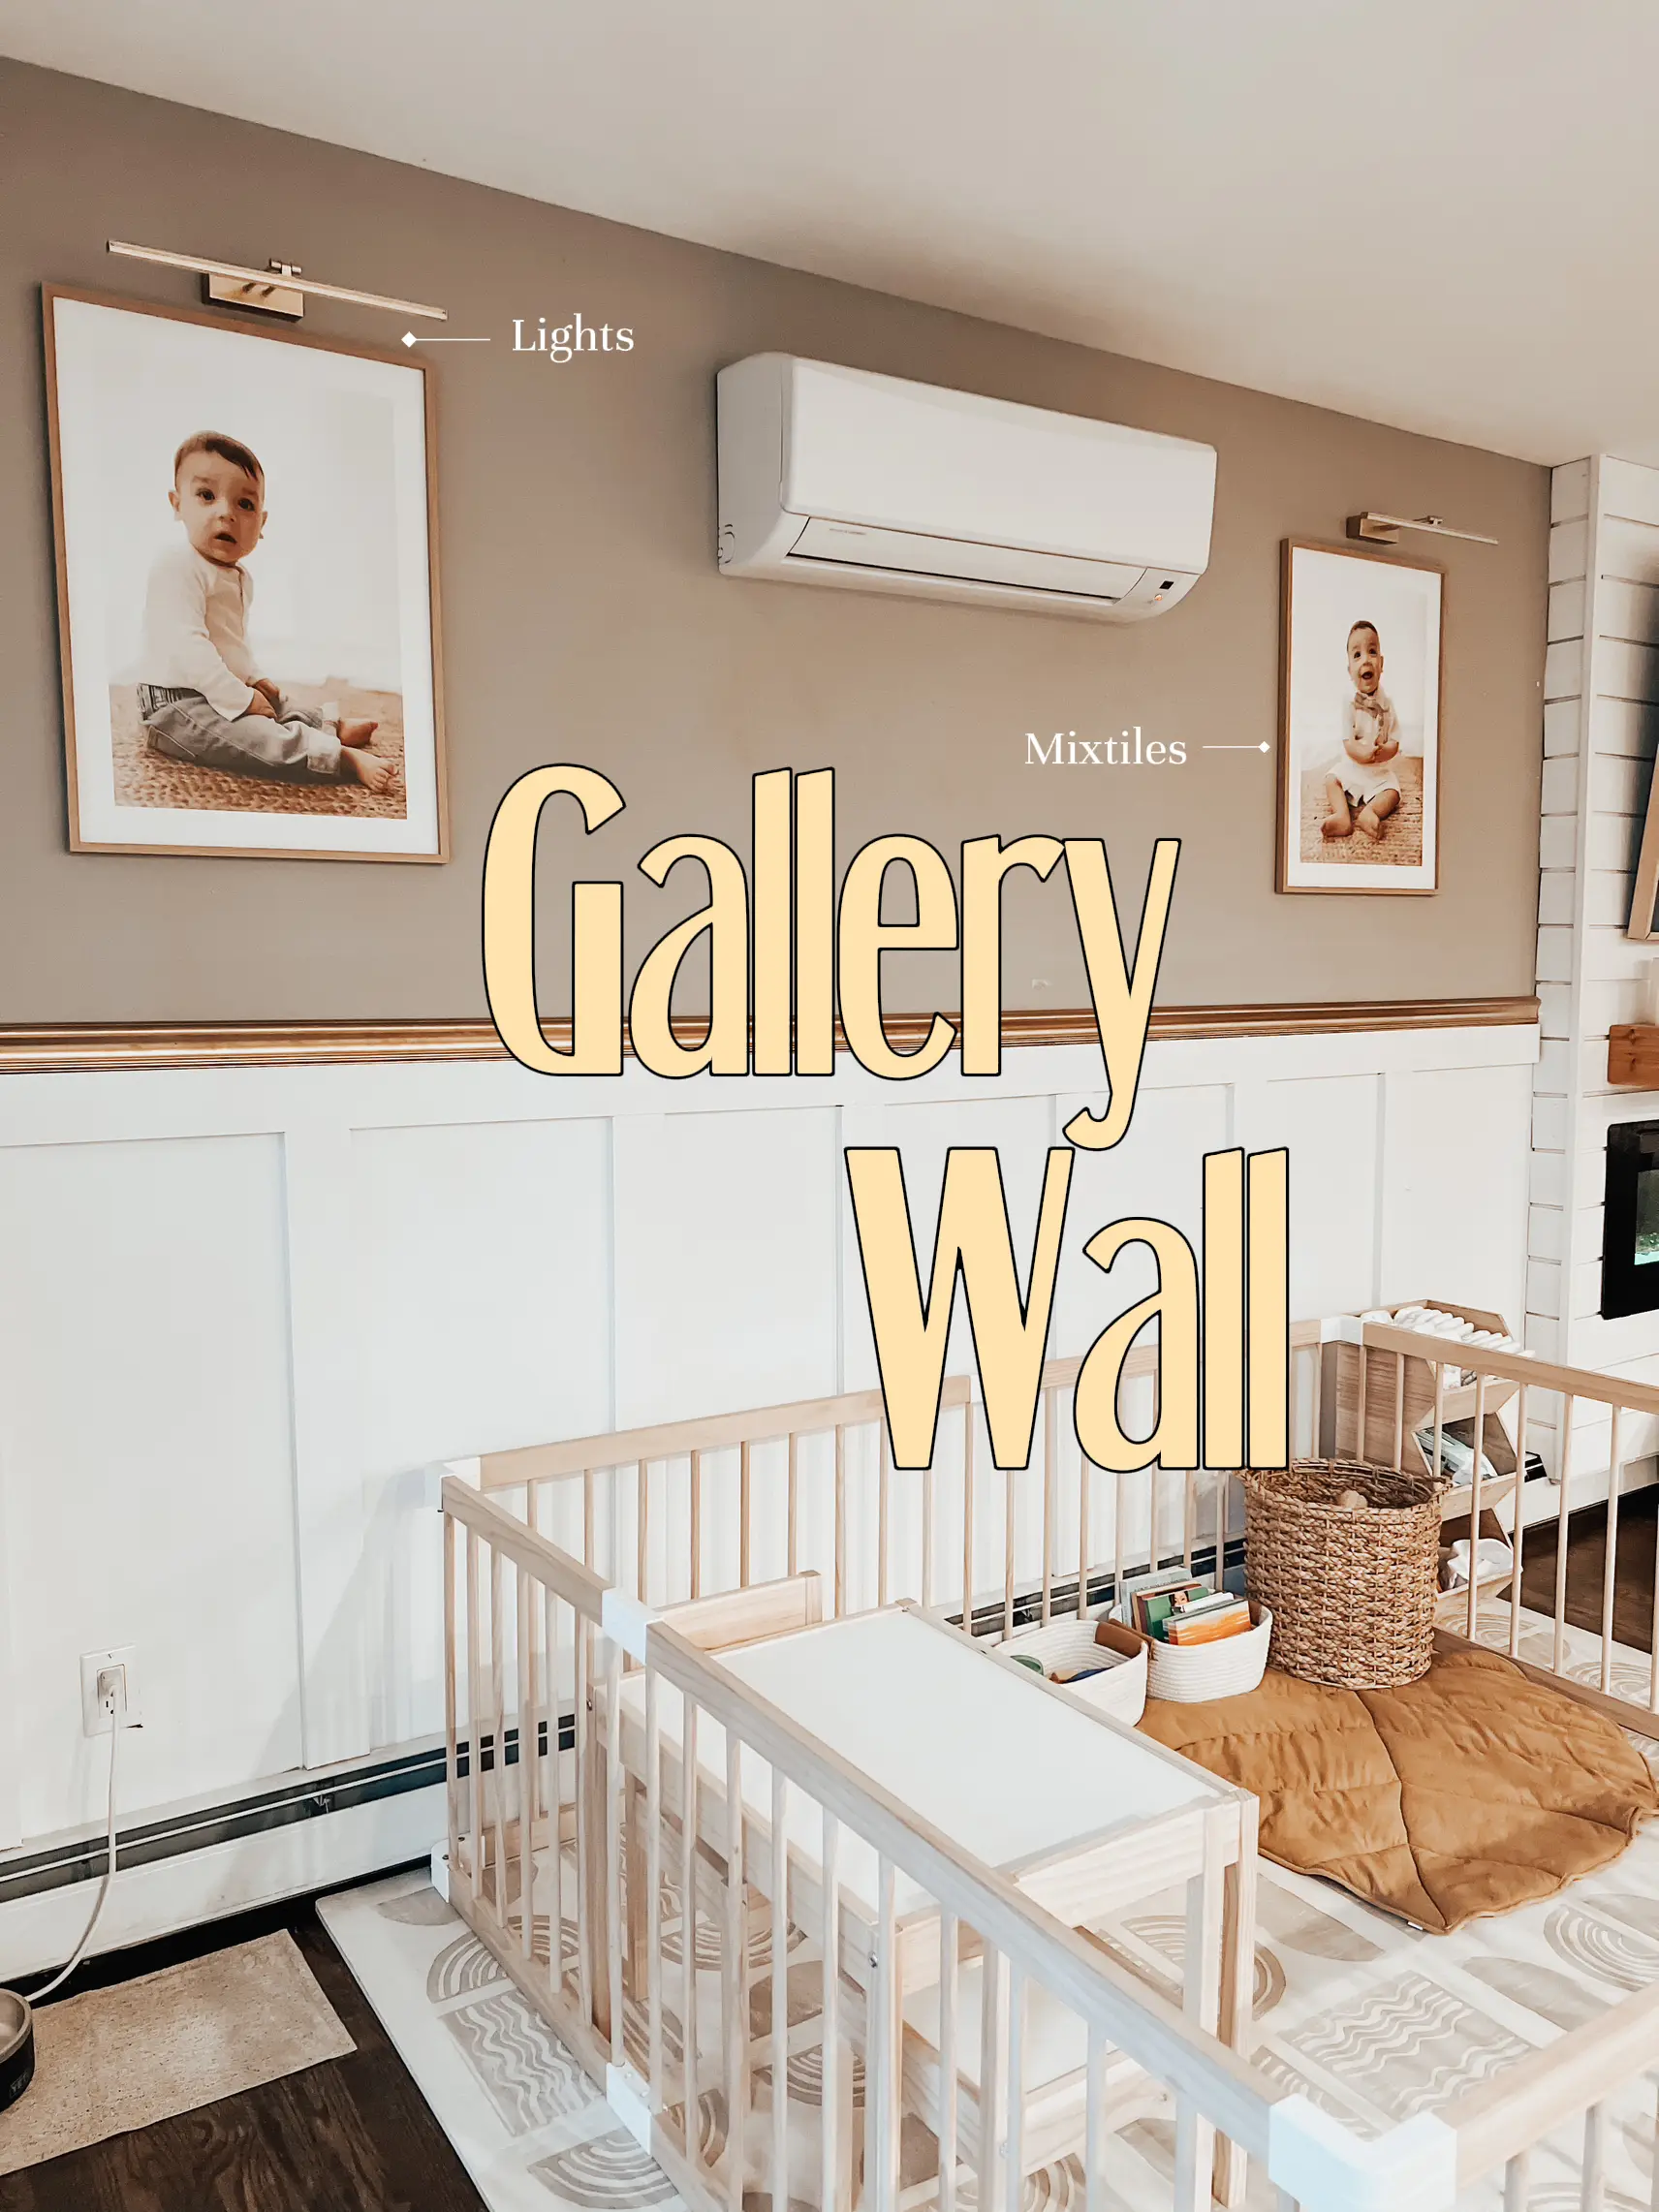 Not-Too-Tacky Family Photo Gallery Wall With Mixtiles